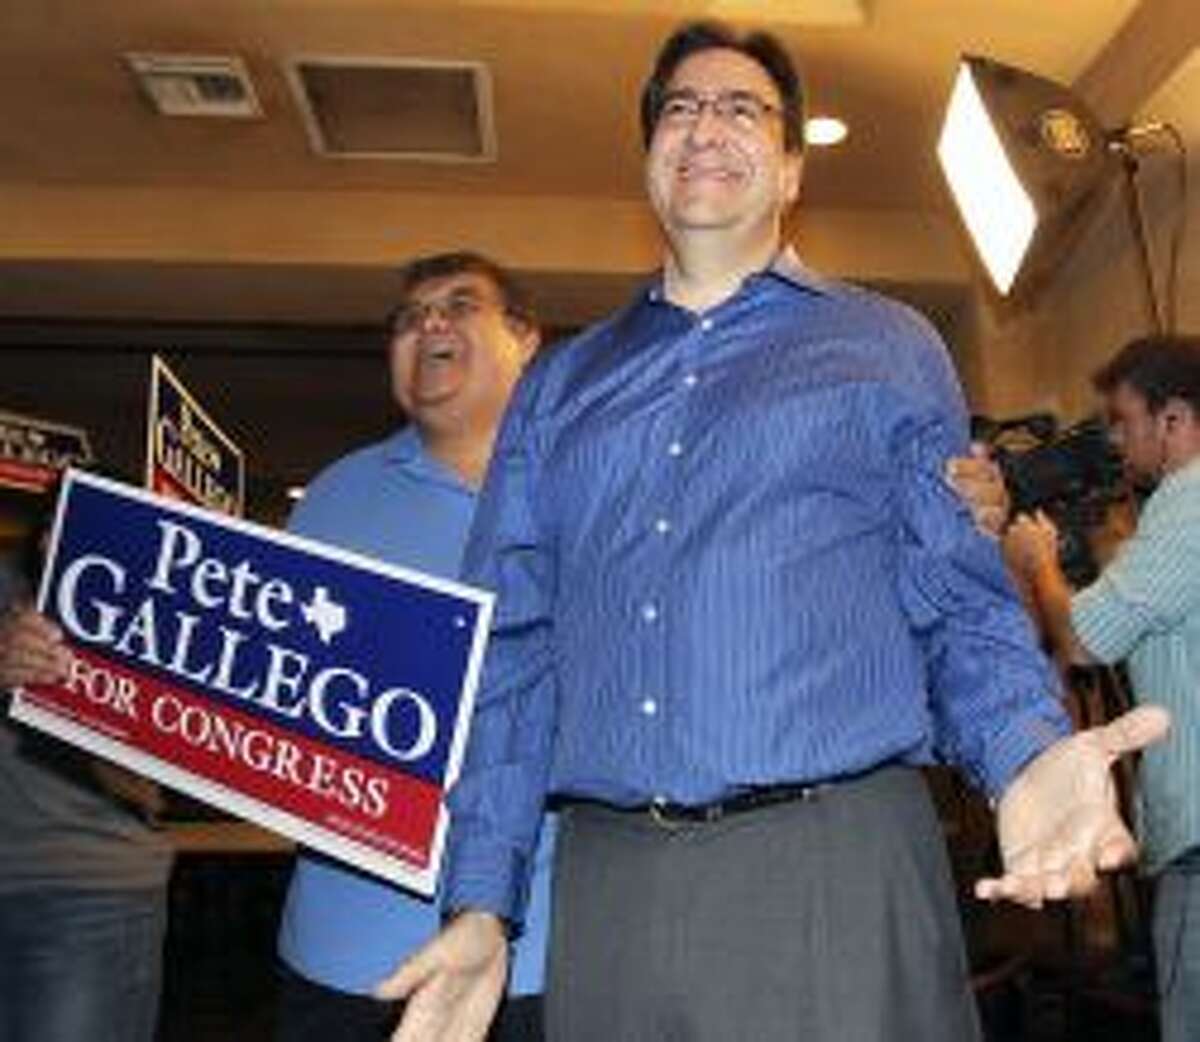 State Rep. Pete Gallego, D-Alpine, reacts to a televised report of a large lead late in the night on Tuesday. Photo: Tom Reel, Staff / 2012 San Antono Express-News